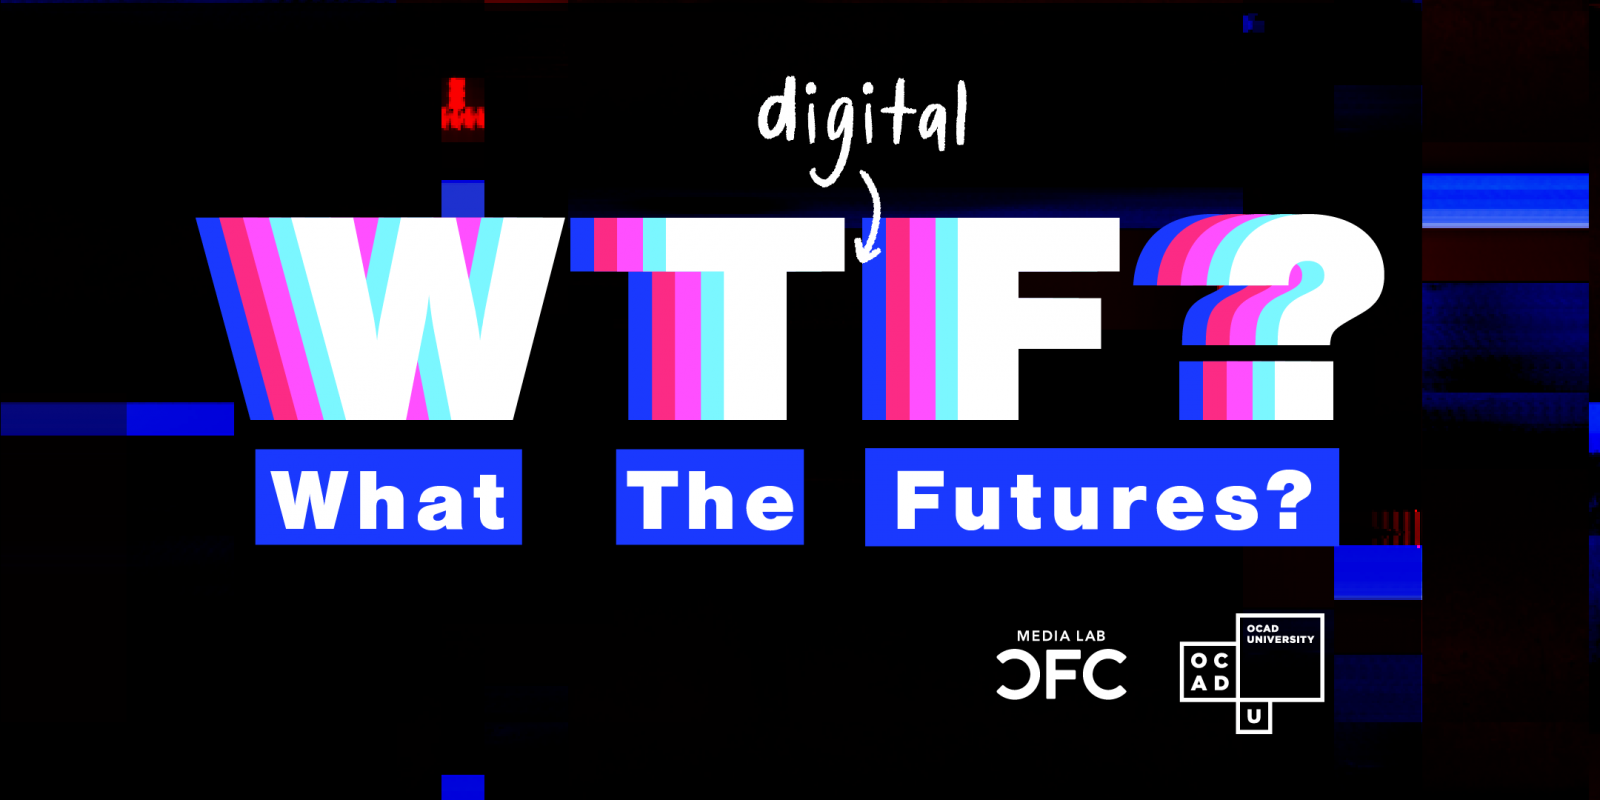 The Digital Futures (DF) graduate program at OCAD University invites you to "What the Futures?" 